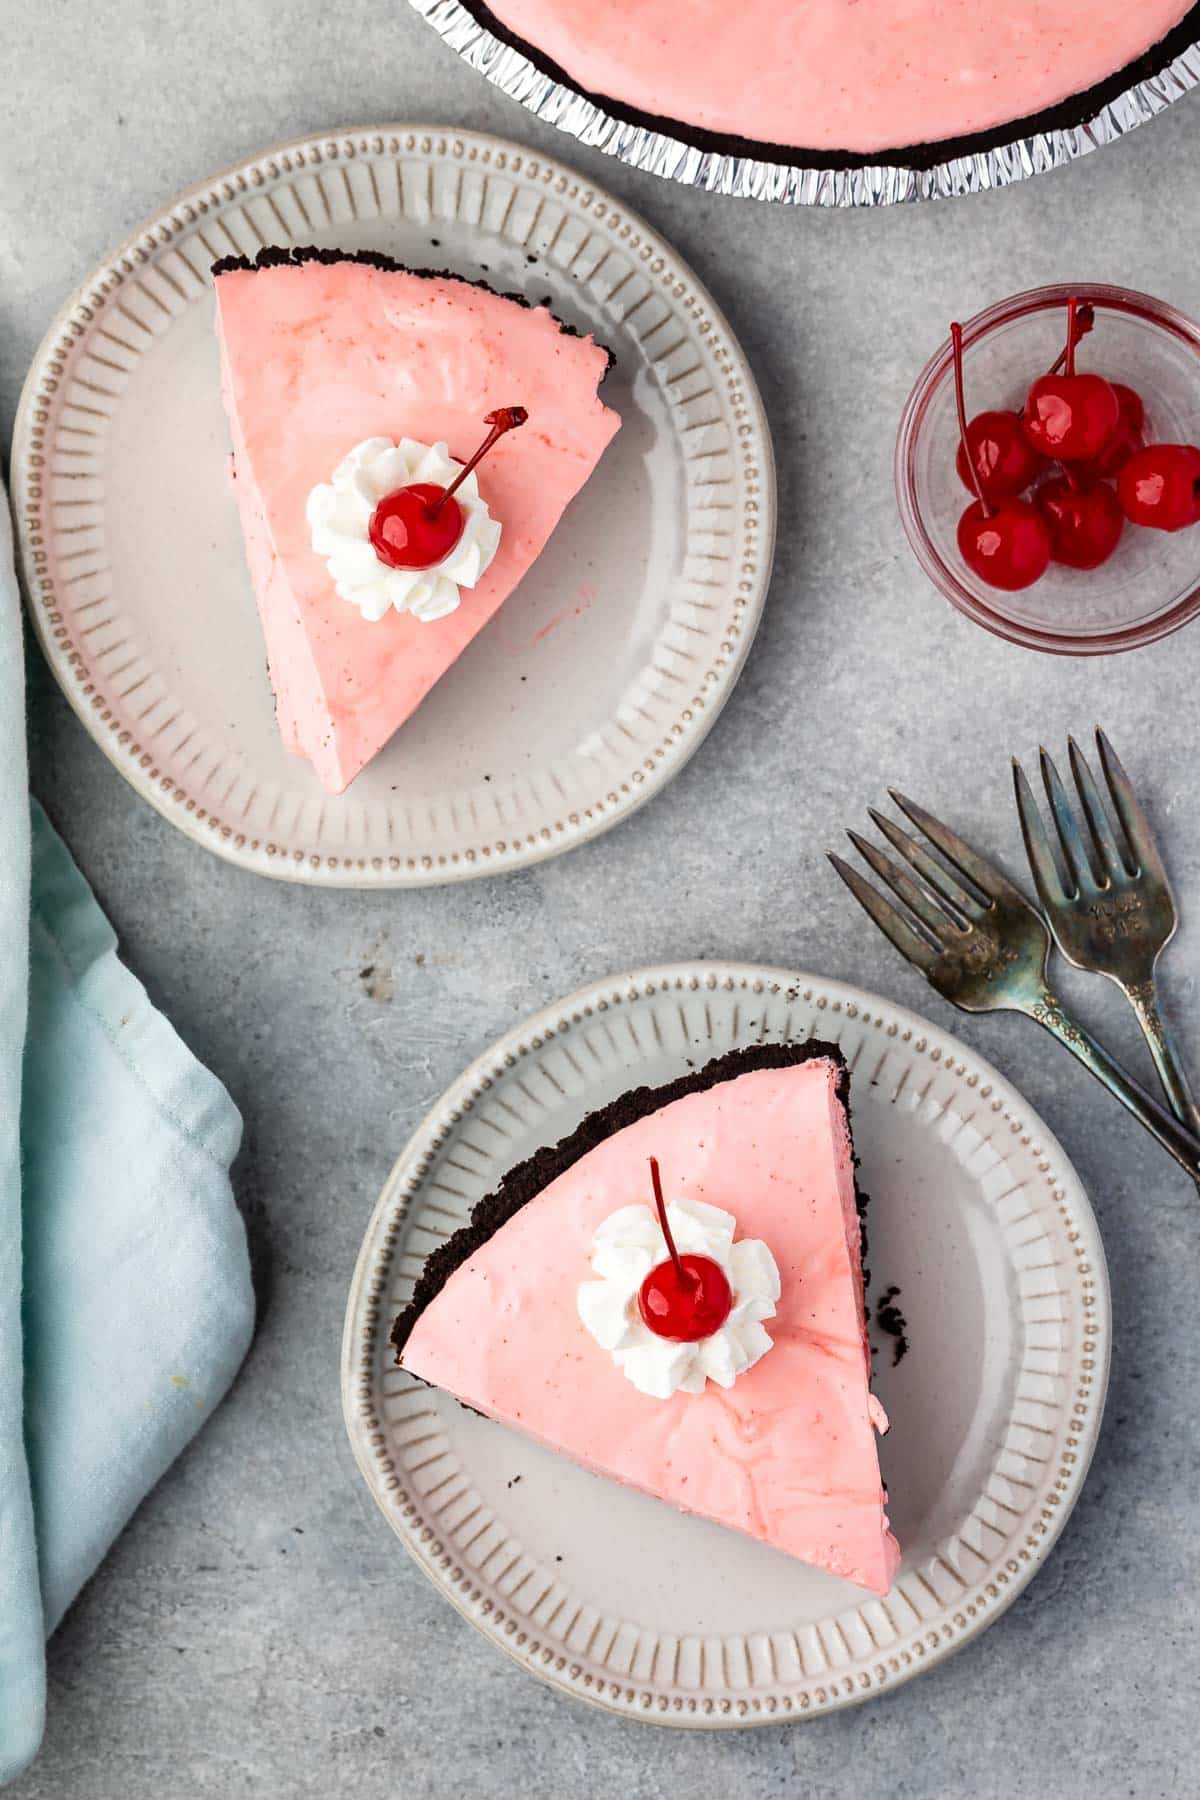 slice of pink pie on oreo crust with whipped cream and a cherry on top.